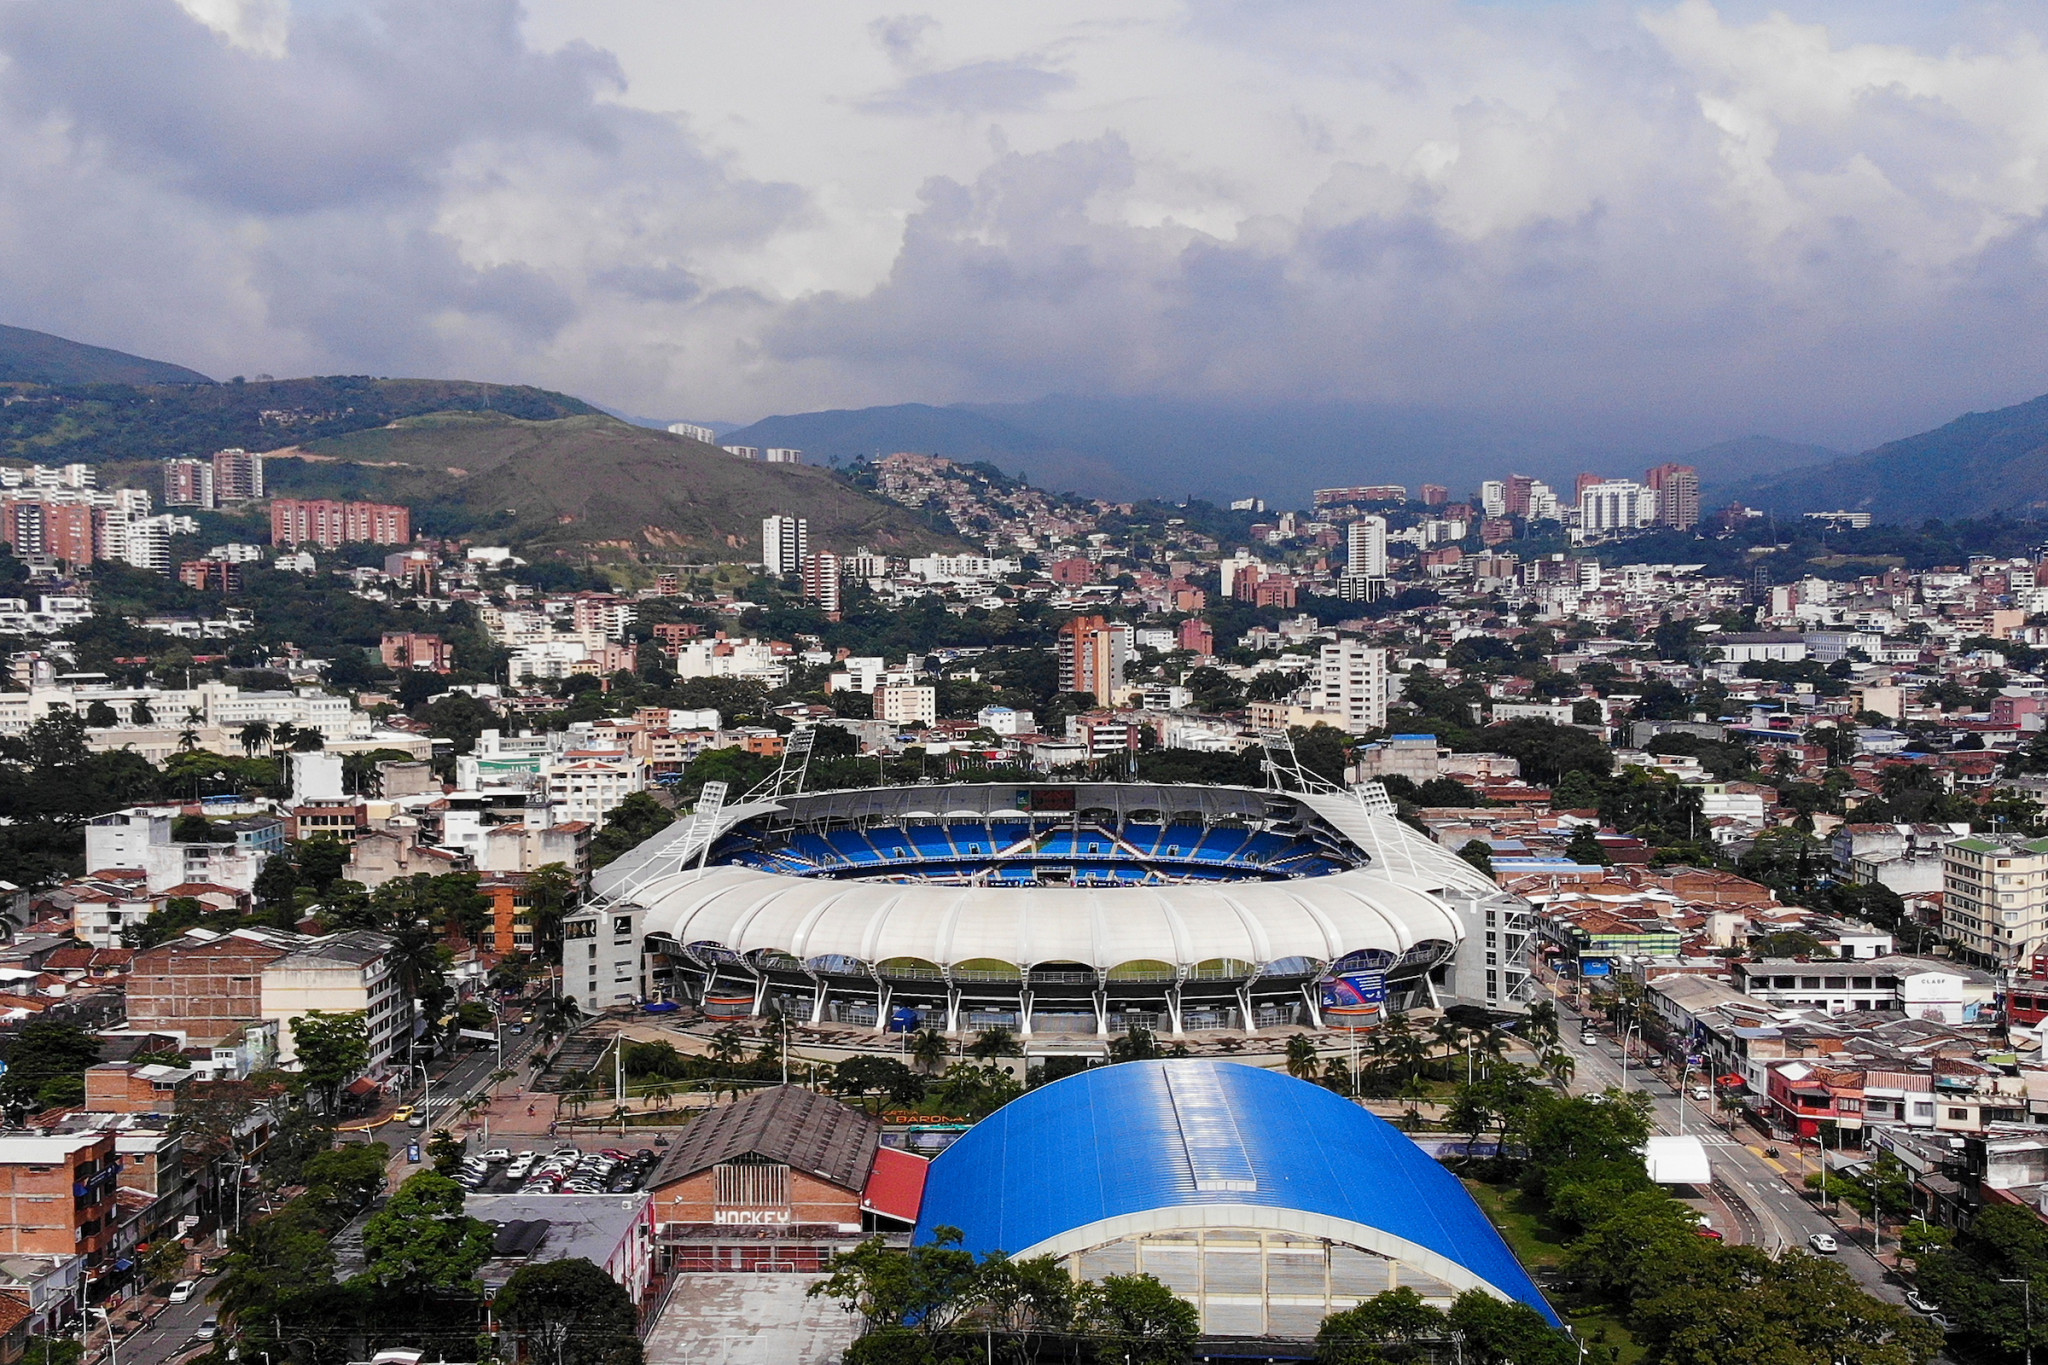 The Junior Pan American Games' athletics events began today at the Pascual Guerrero Olympic Stadium ©Agencia.Xpress Media